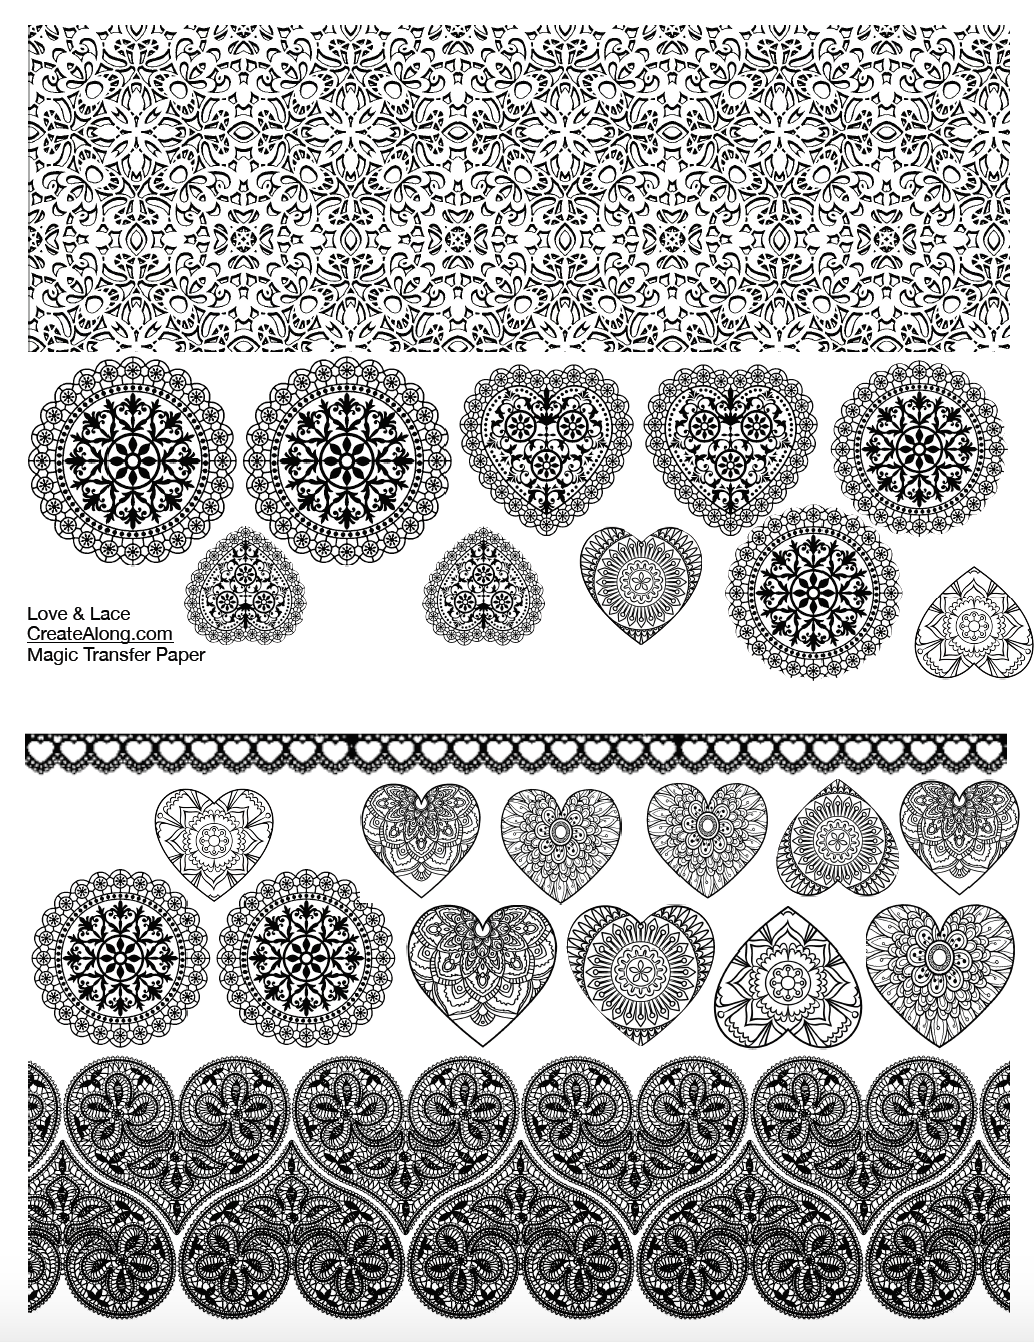 Digital Love & Lace Image Transfer PDF for creating images on raw polymer clay and for use with Magic Transfer Paper